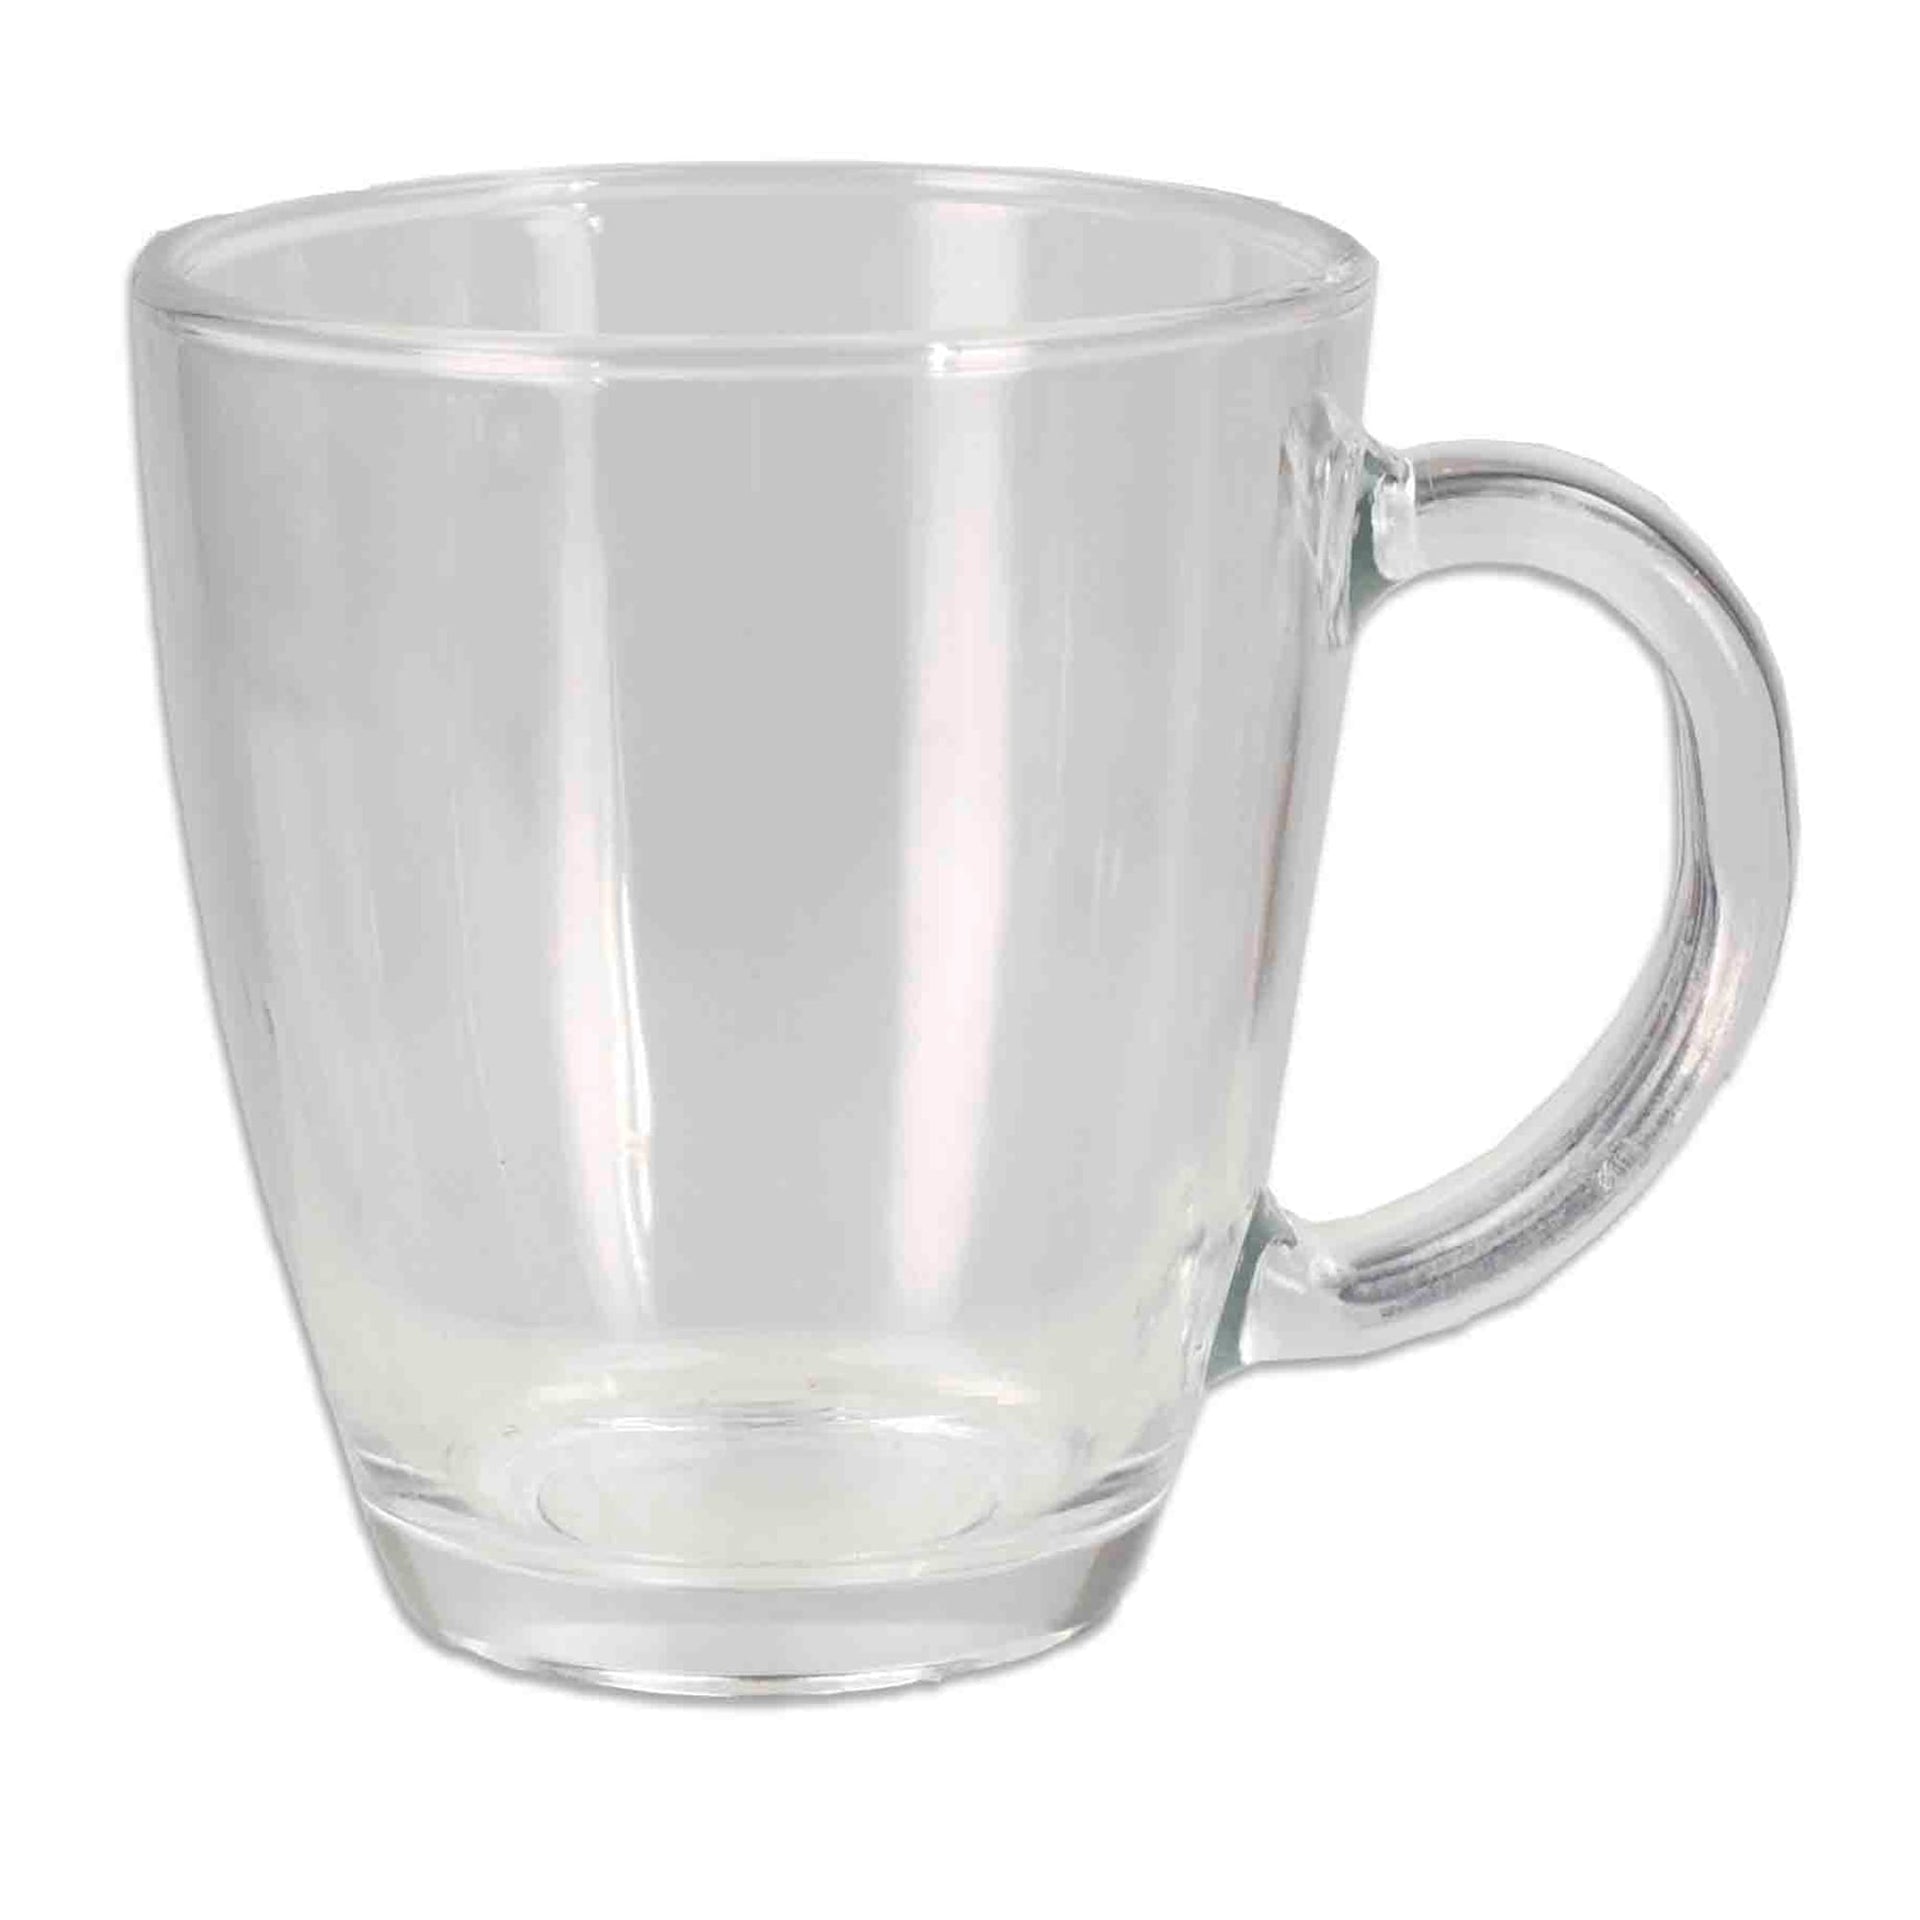 MAQQL Clear Glass Mug with Handle, Blue Handle/16.9 oz,  Thickened high borosilicate glass mug for large glass coffee cups with  handles, beverage mugs with handles, or as a gift!: Coffee